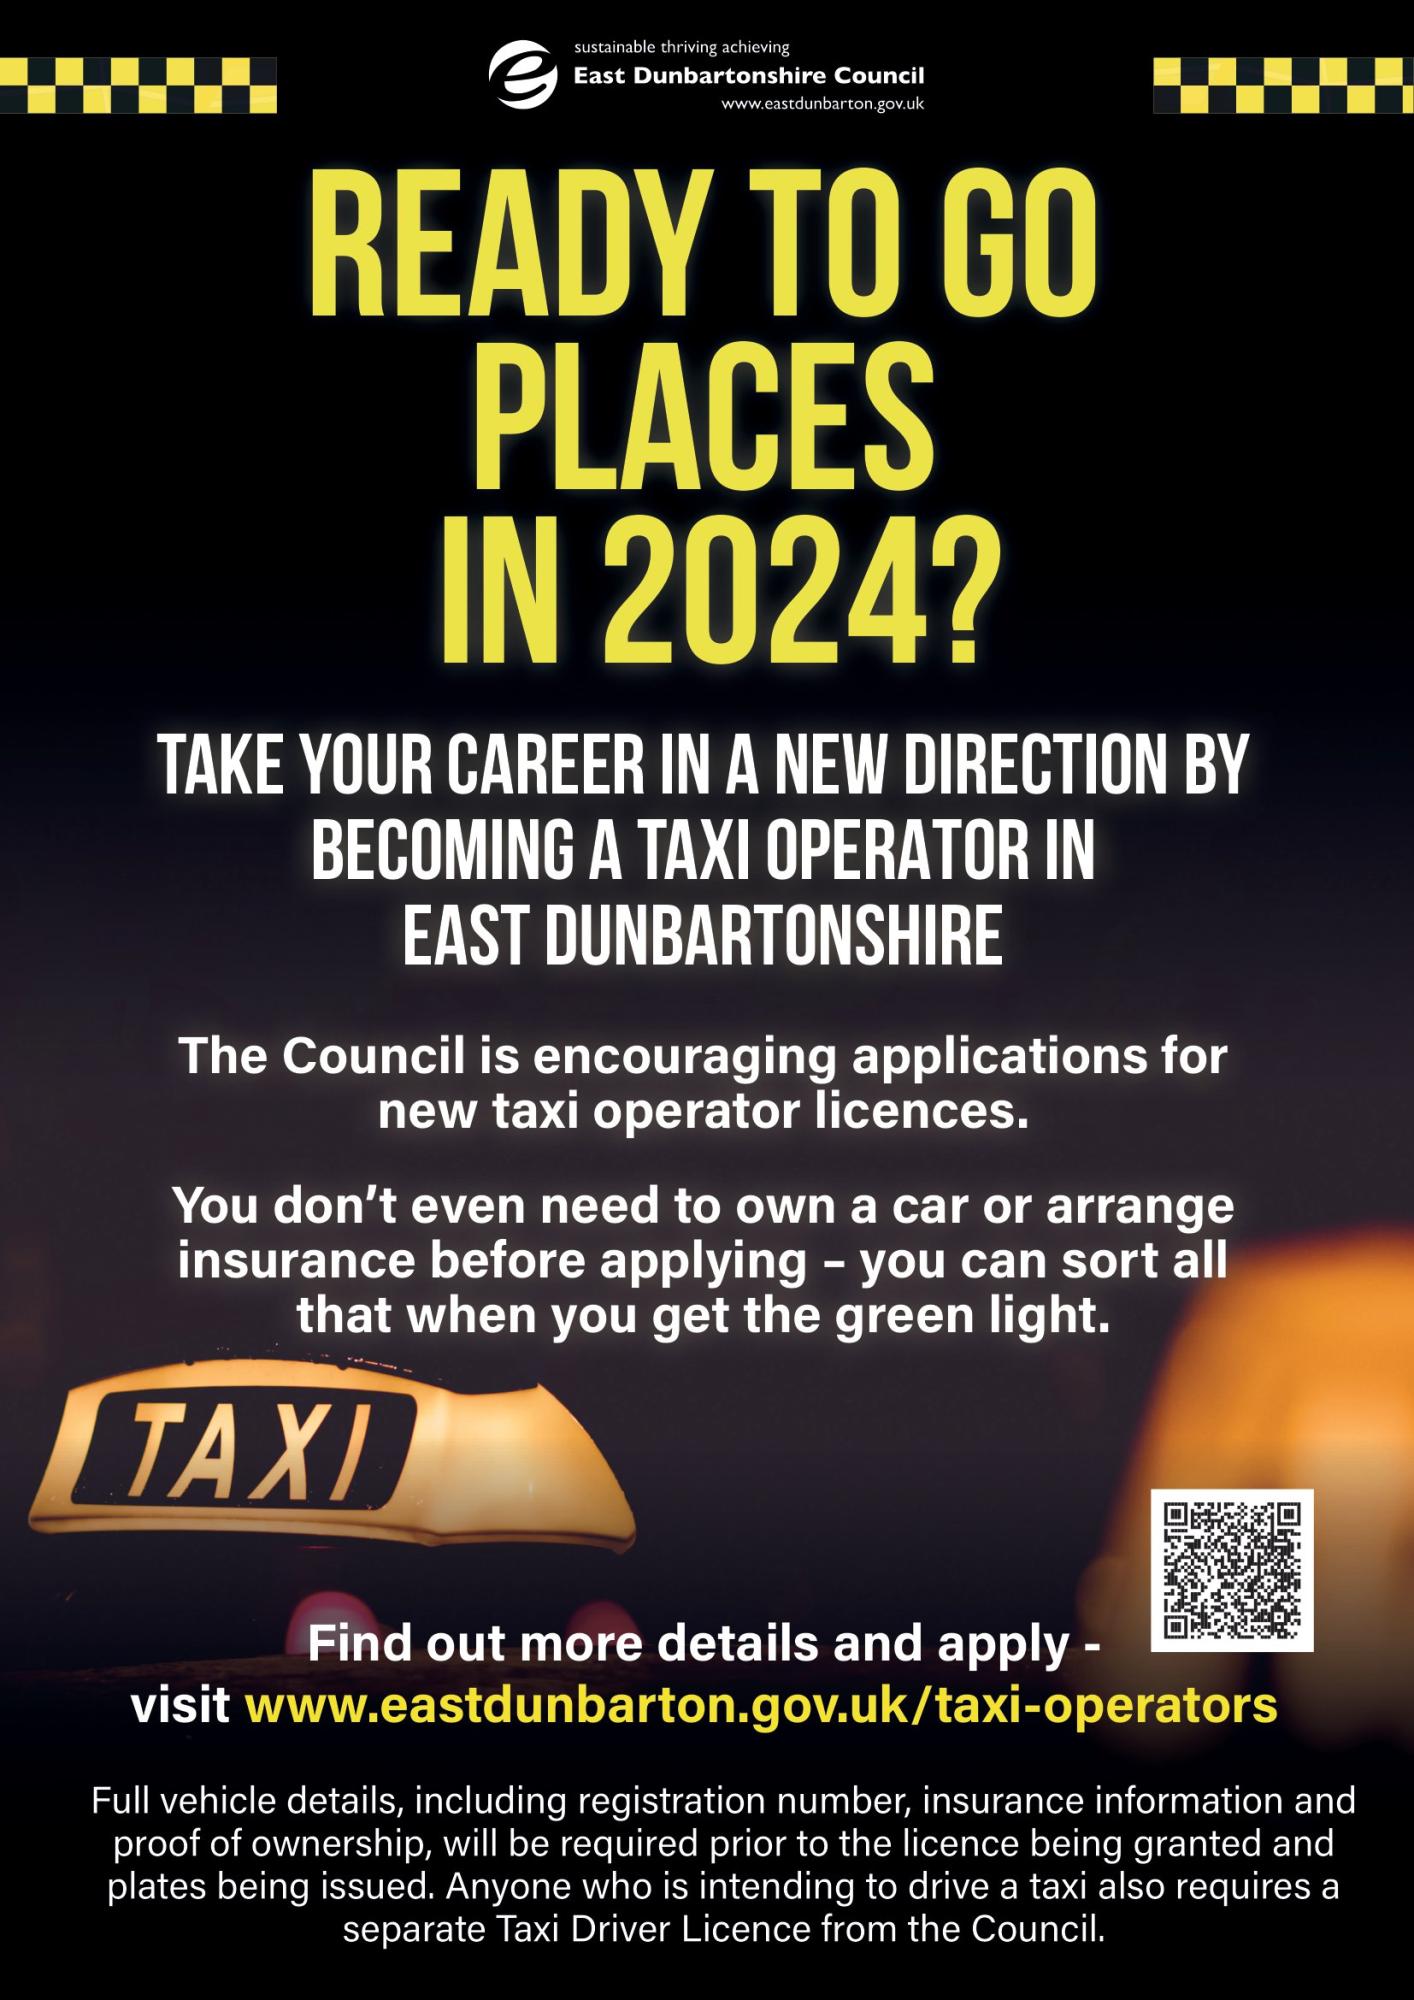 Leaflet of a taxi with text: Ready to go places in 2024? Take your career in a new direction by becoming a taxi driver in East Dunbartonshire. The Council is encouraging applications for new taxi operator licences. Find out more details and apply – visit www.eastdunbarton.gov.uk/taxi-operators  